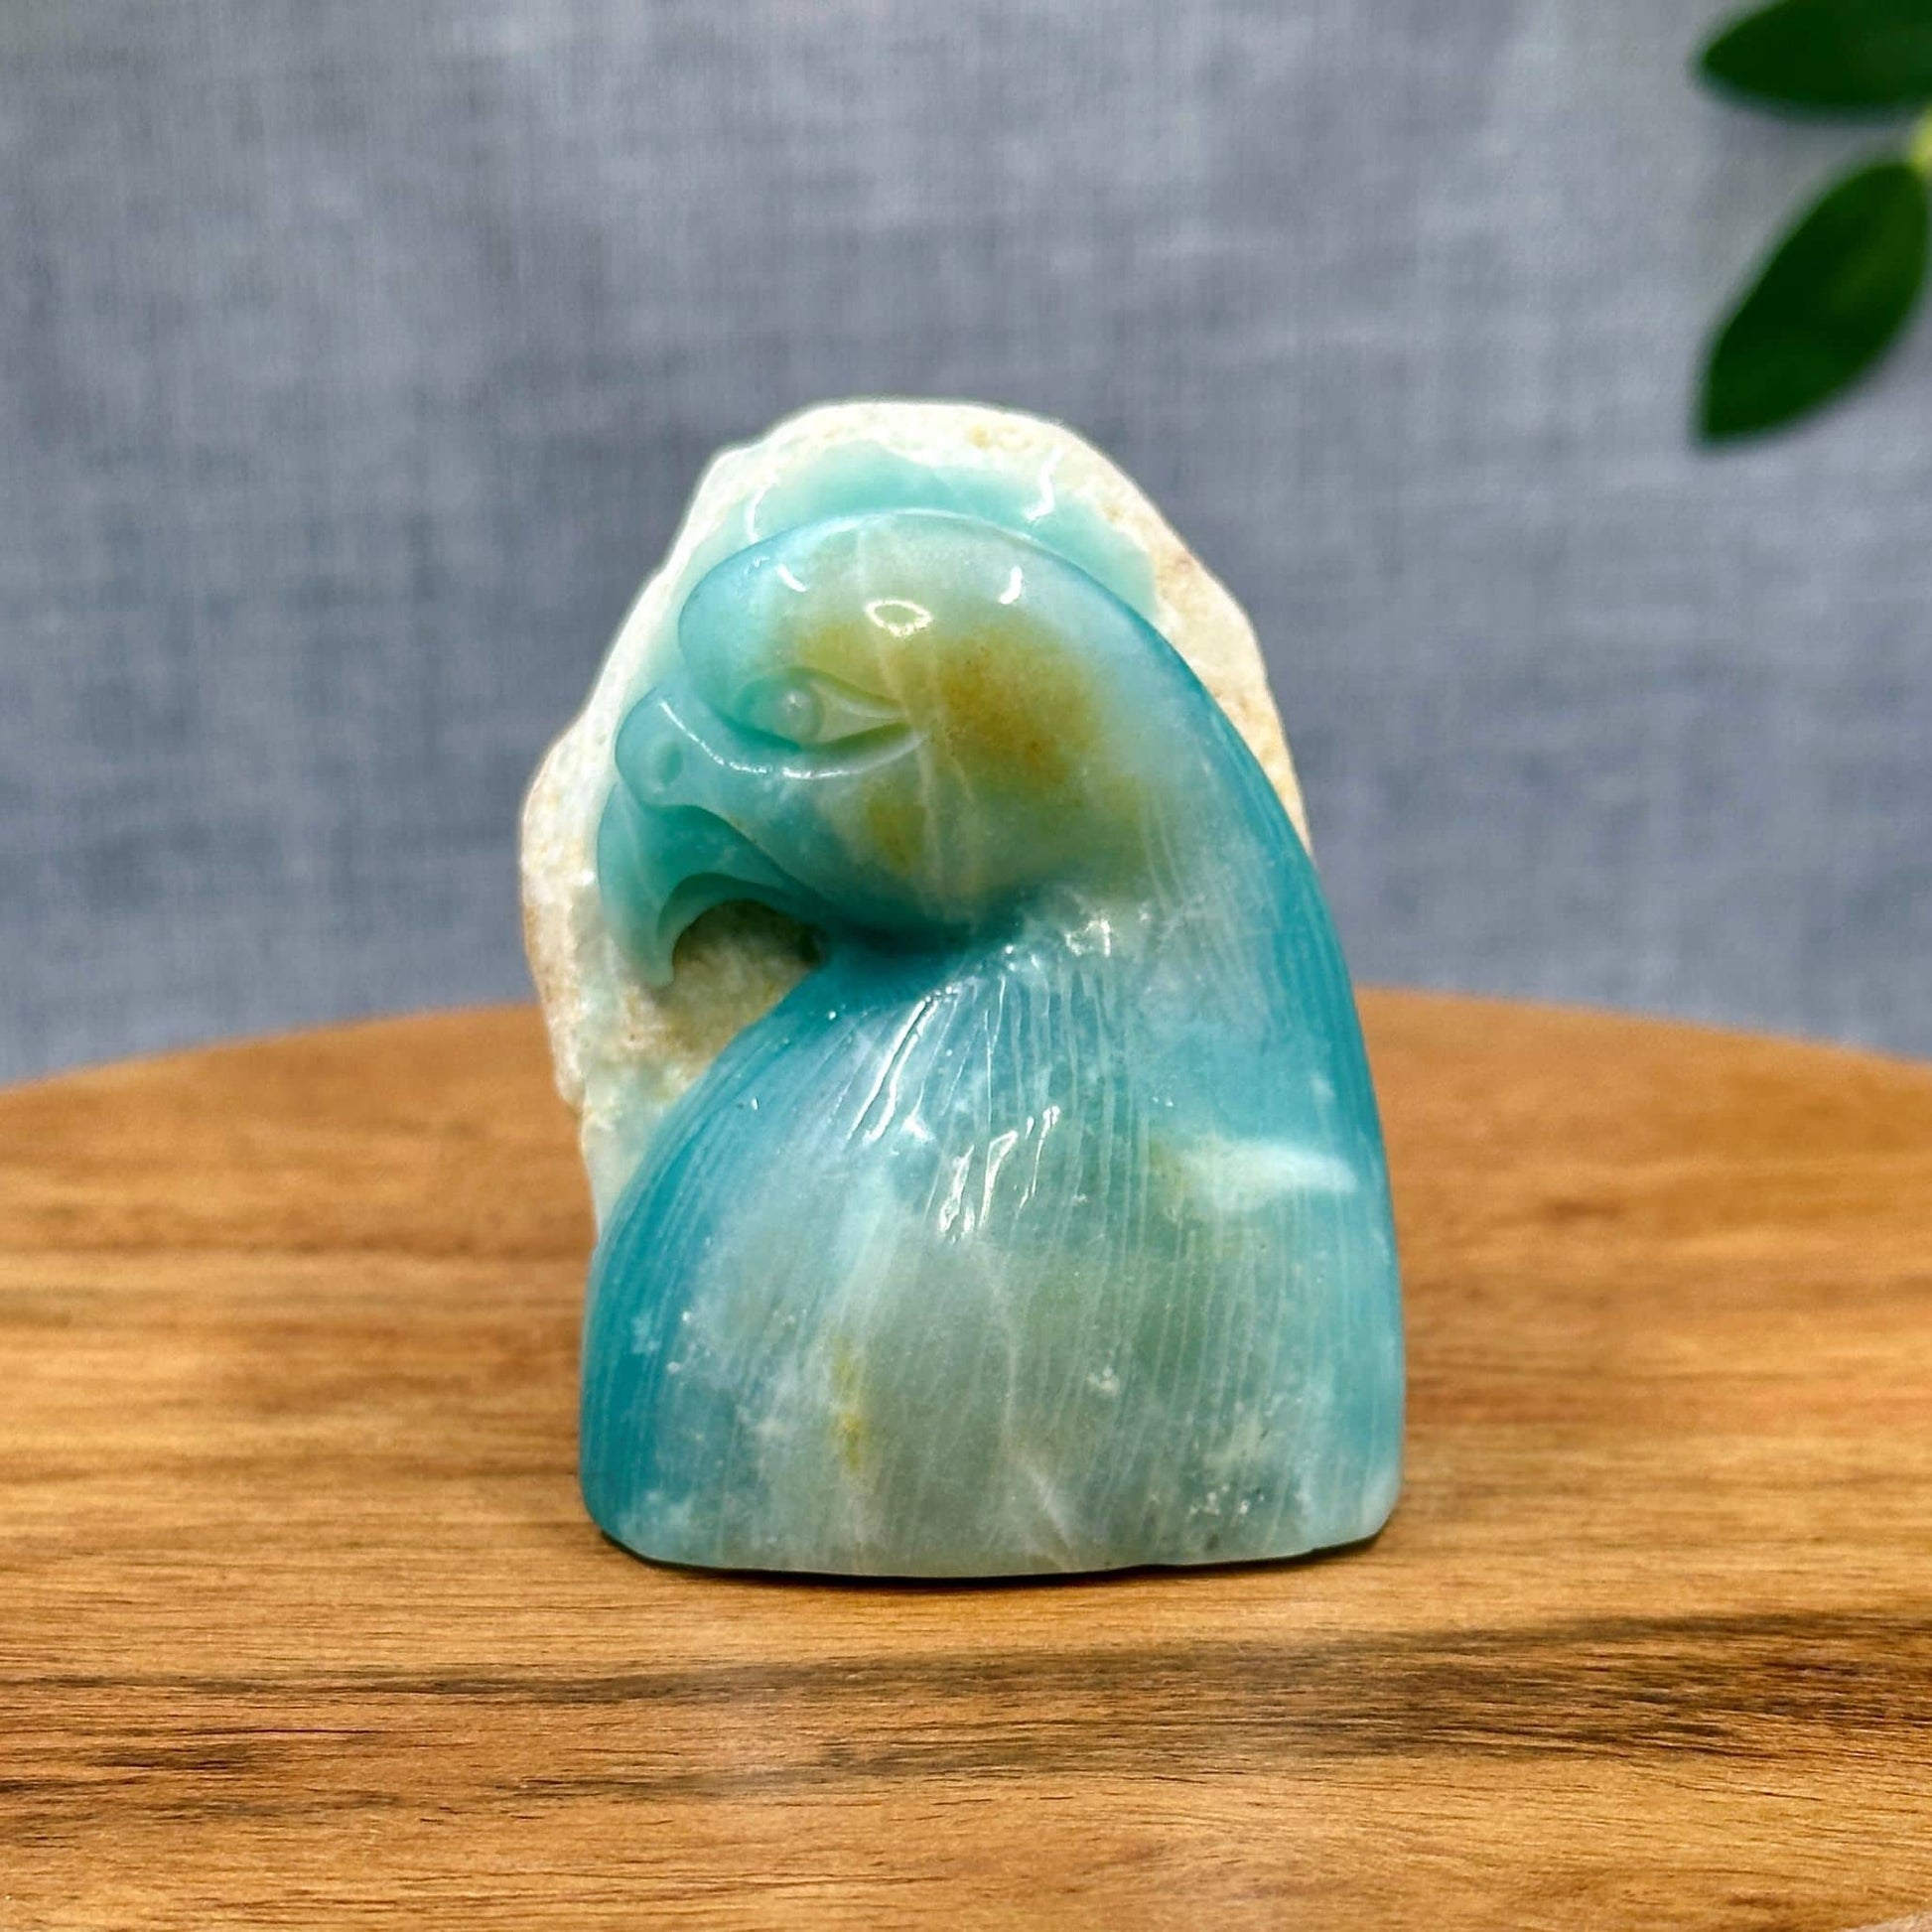 Caribbean Calcite Eagle Carving - Itsy's Crystal Cove LLC